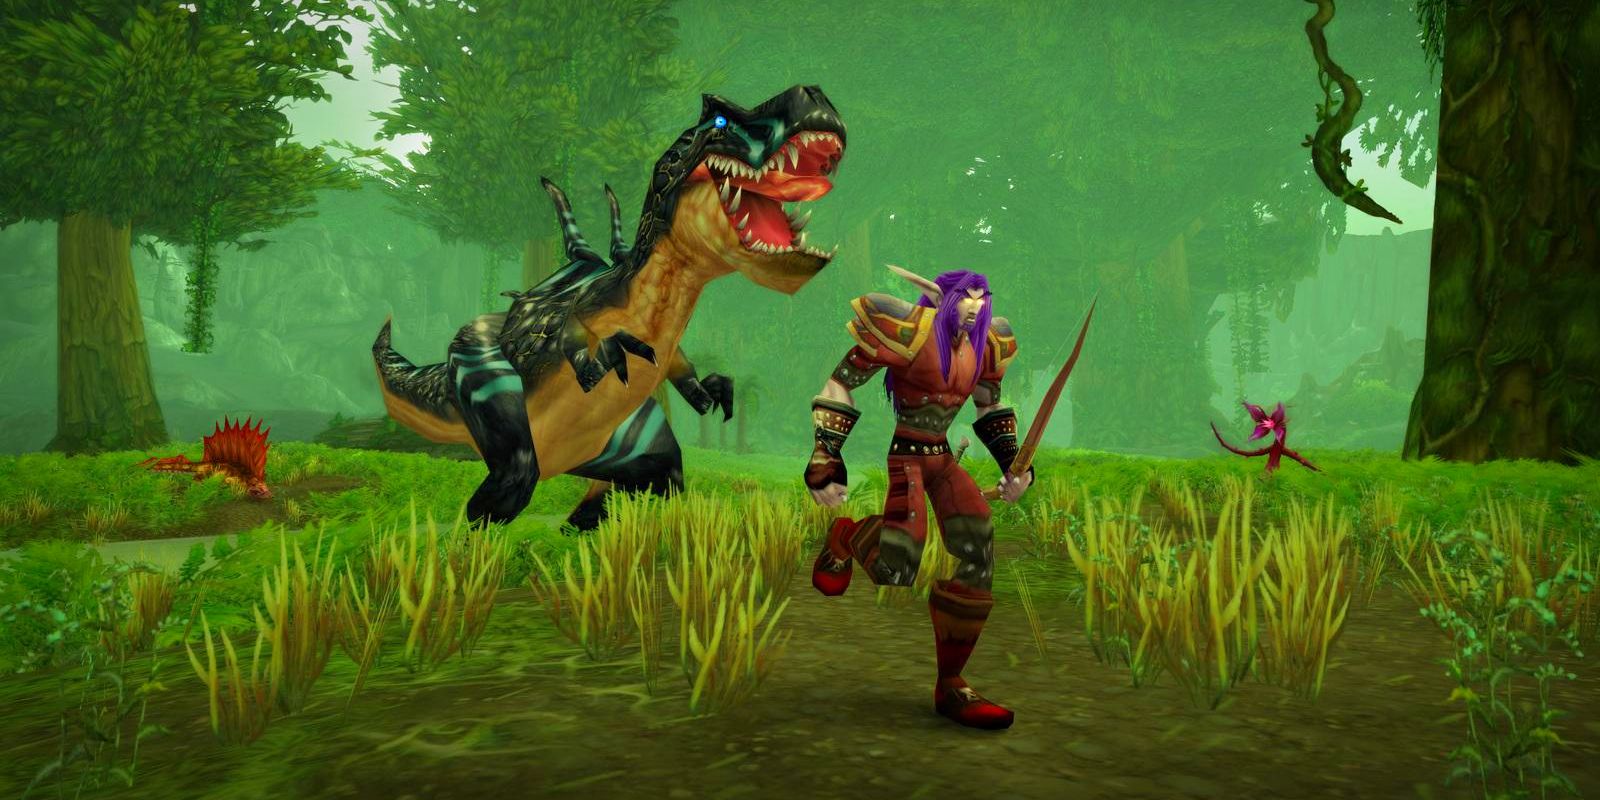 A dinosaur chasing a World of Warcraft character through a forest.